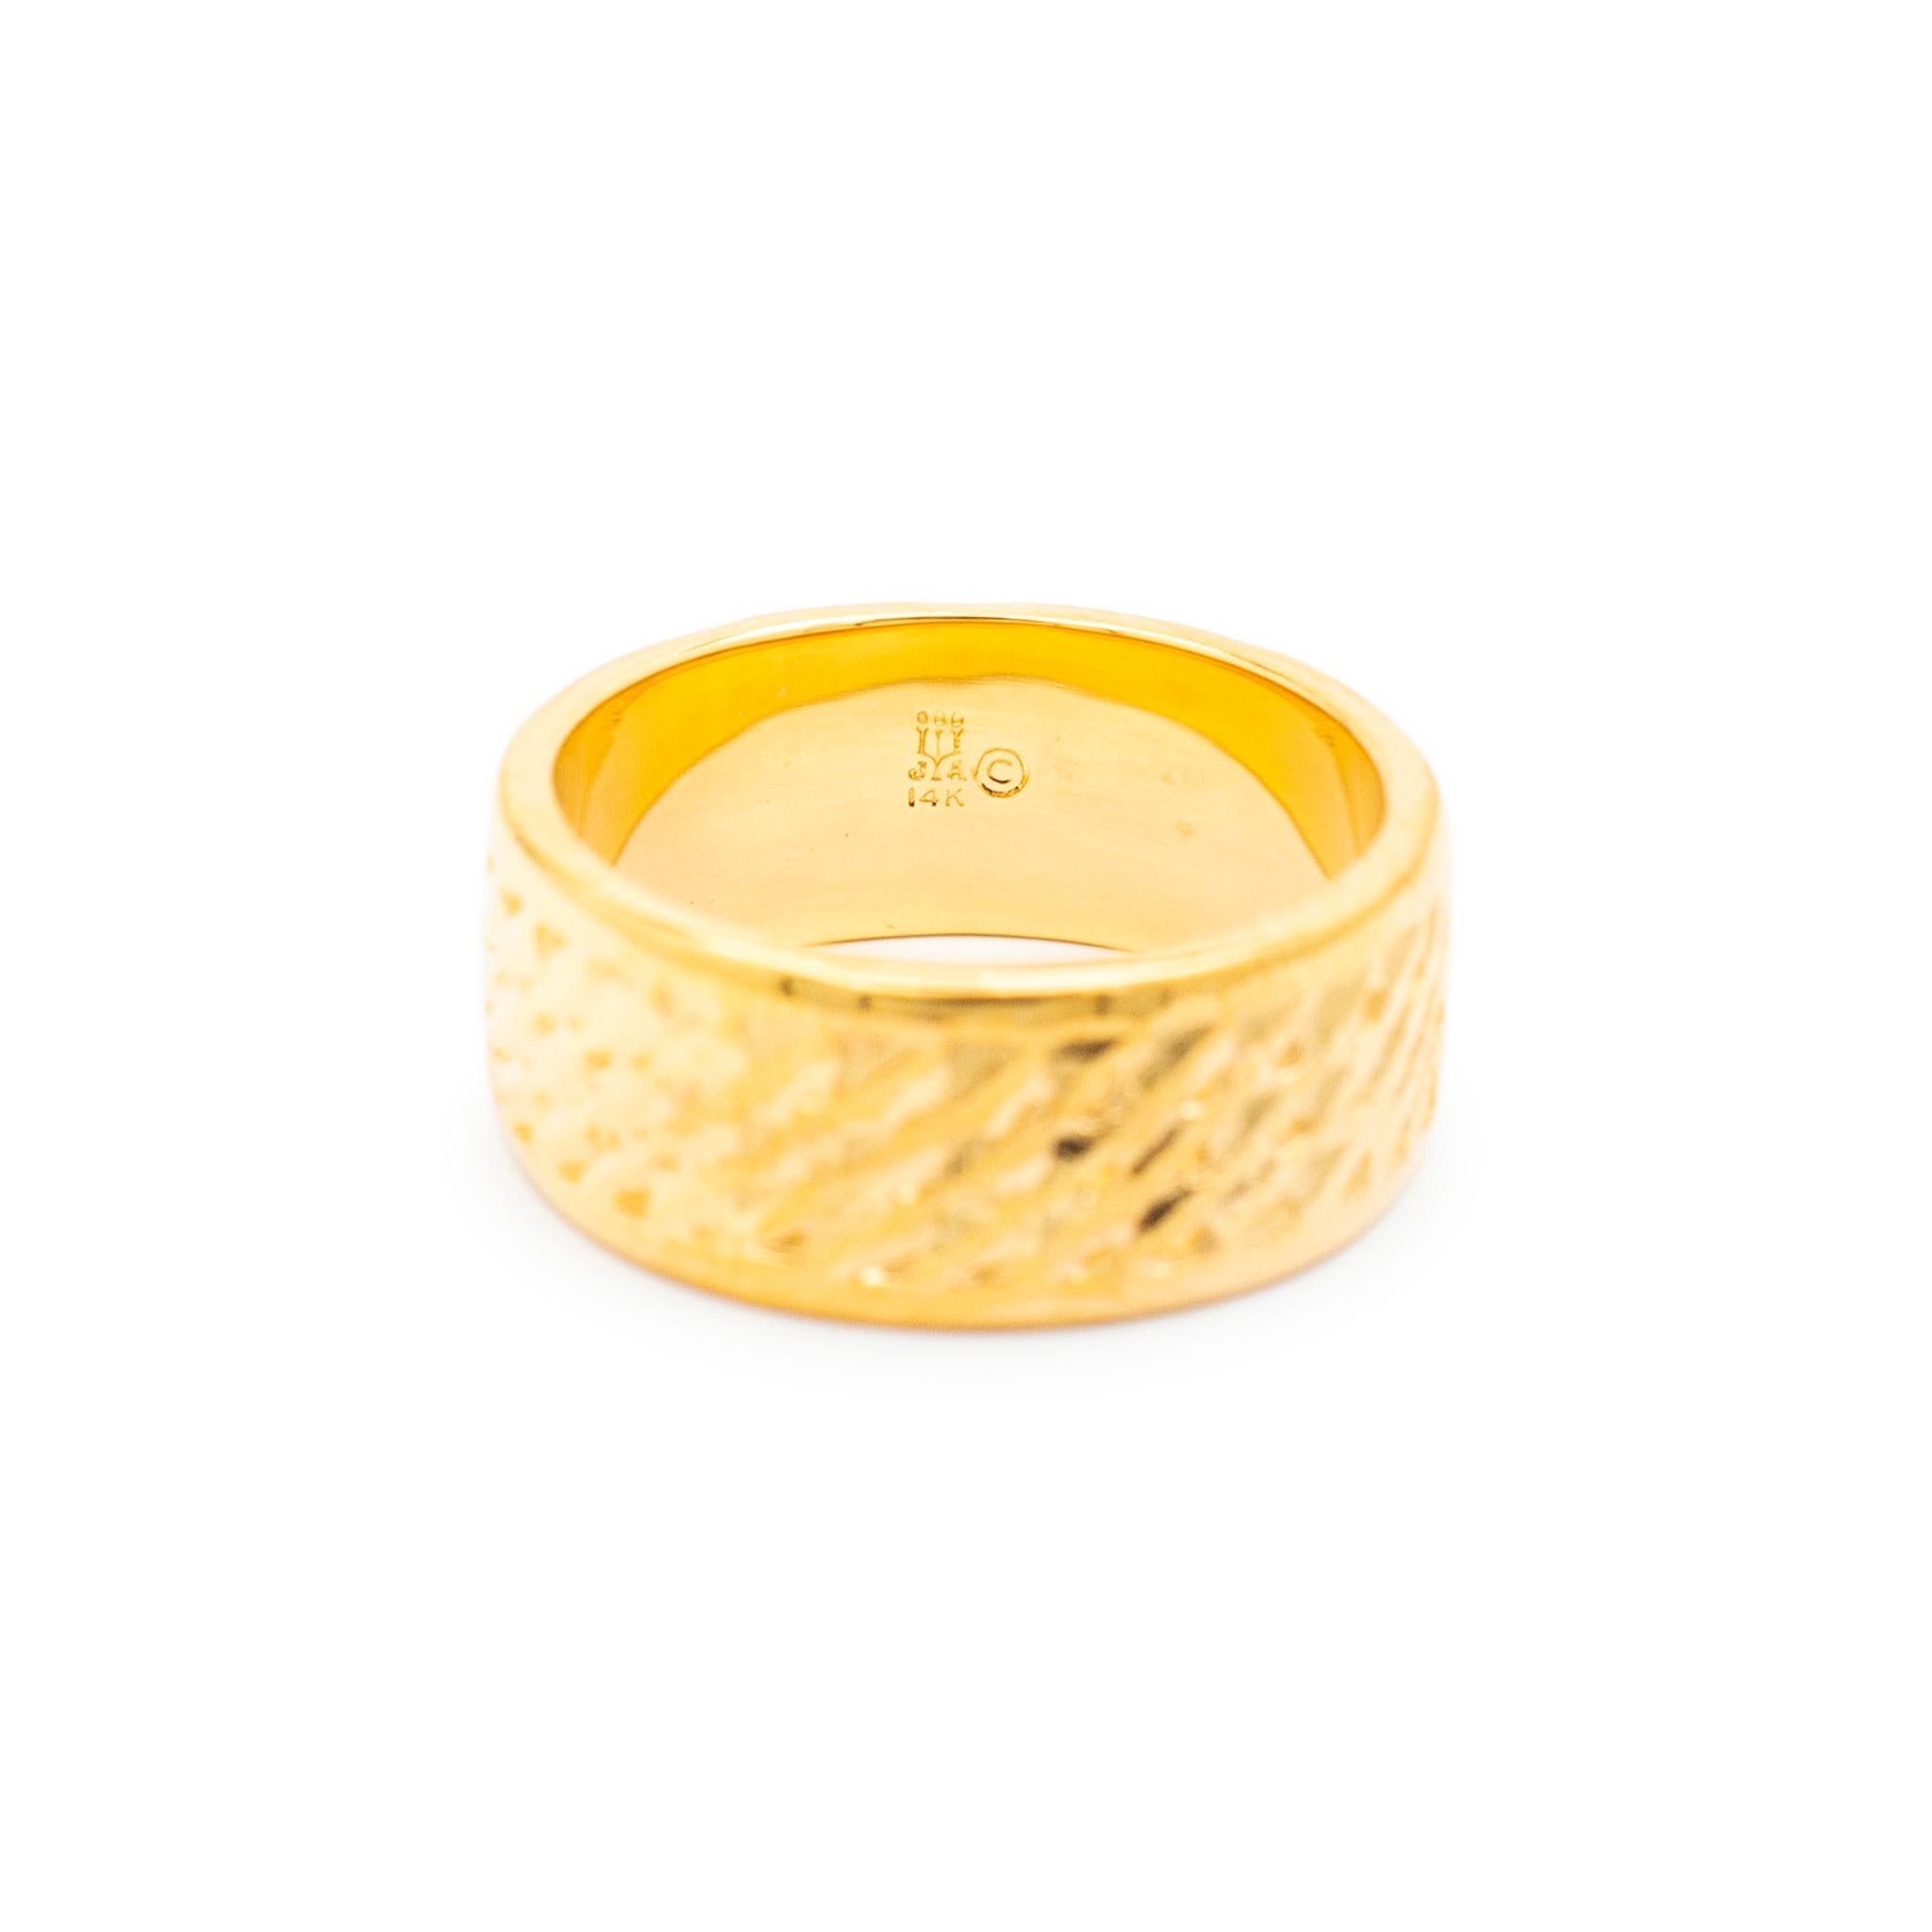 Gender: Ladies

Metal Type: 14K White Gold

Size: 9

Shank Maximum Width: 8.95

Weight: 12.20 grams

Man's 14K yellow gold wedding band with a soft-square shank. Engraved with 